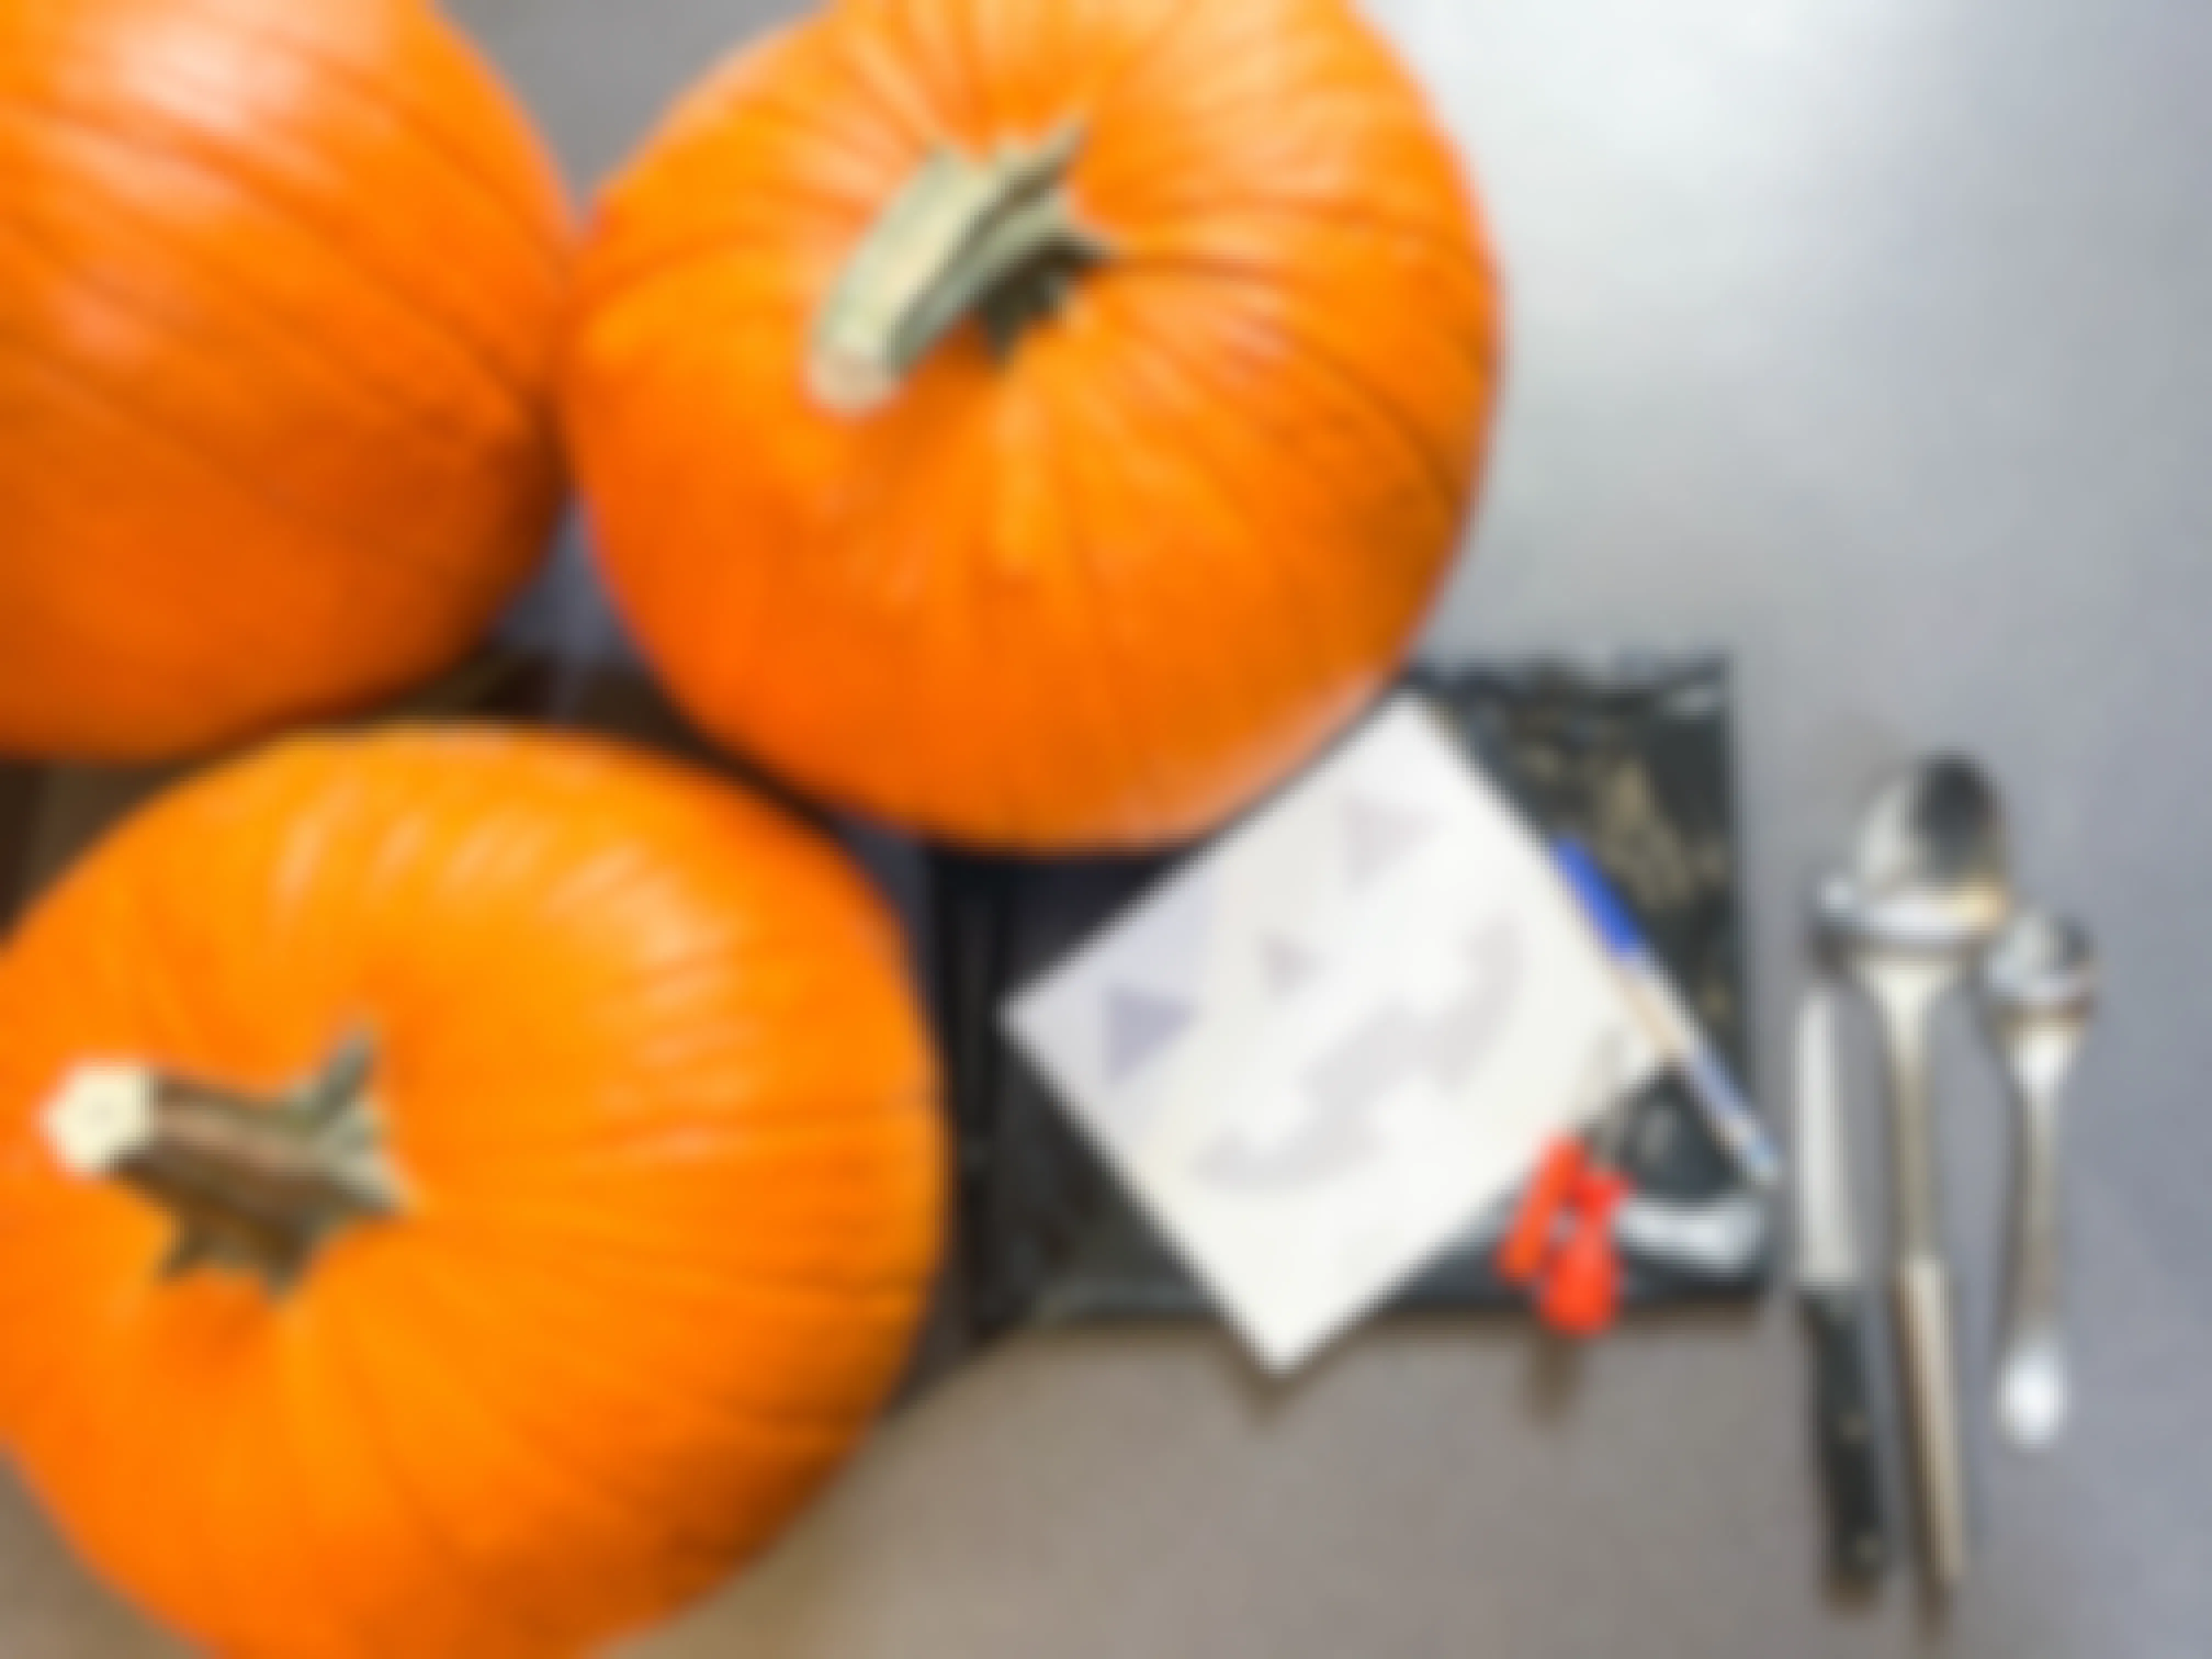 supplies to carve a face in a pumpkin on a countertop